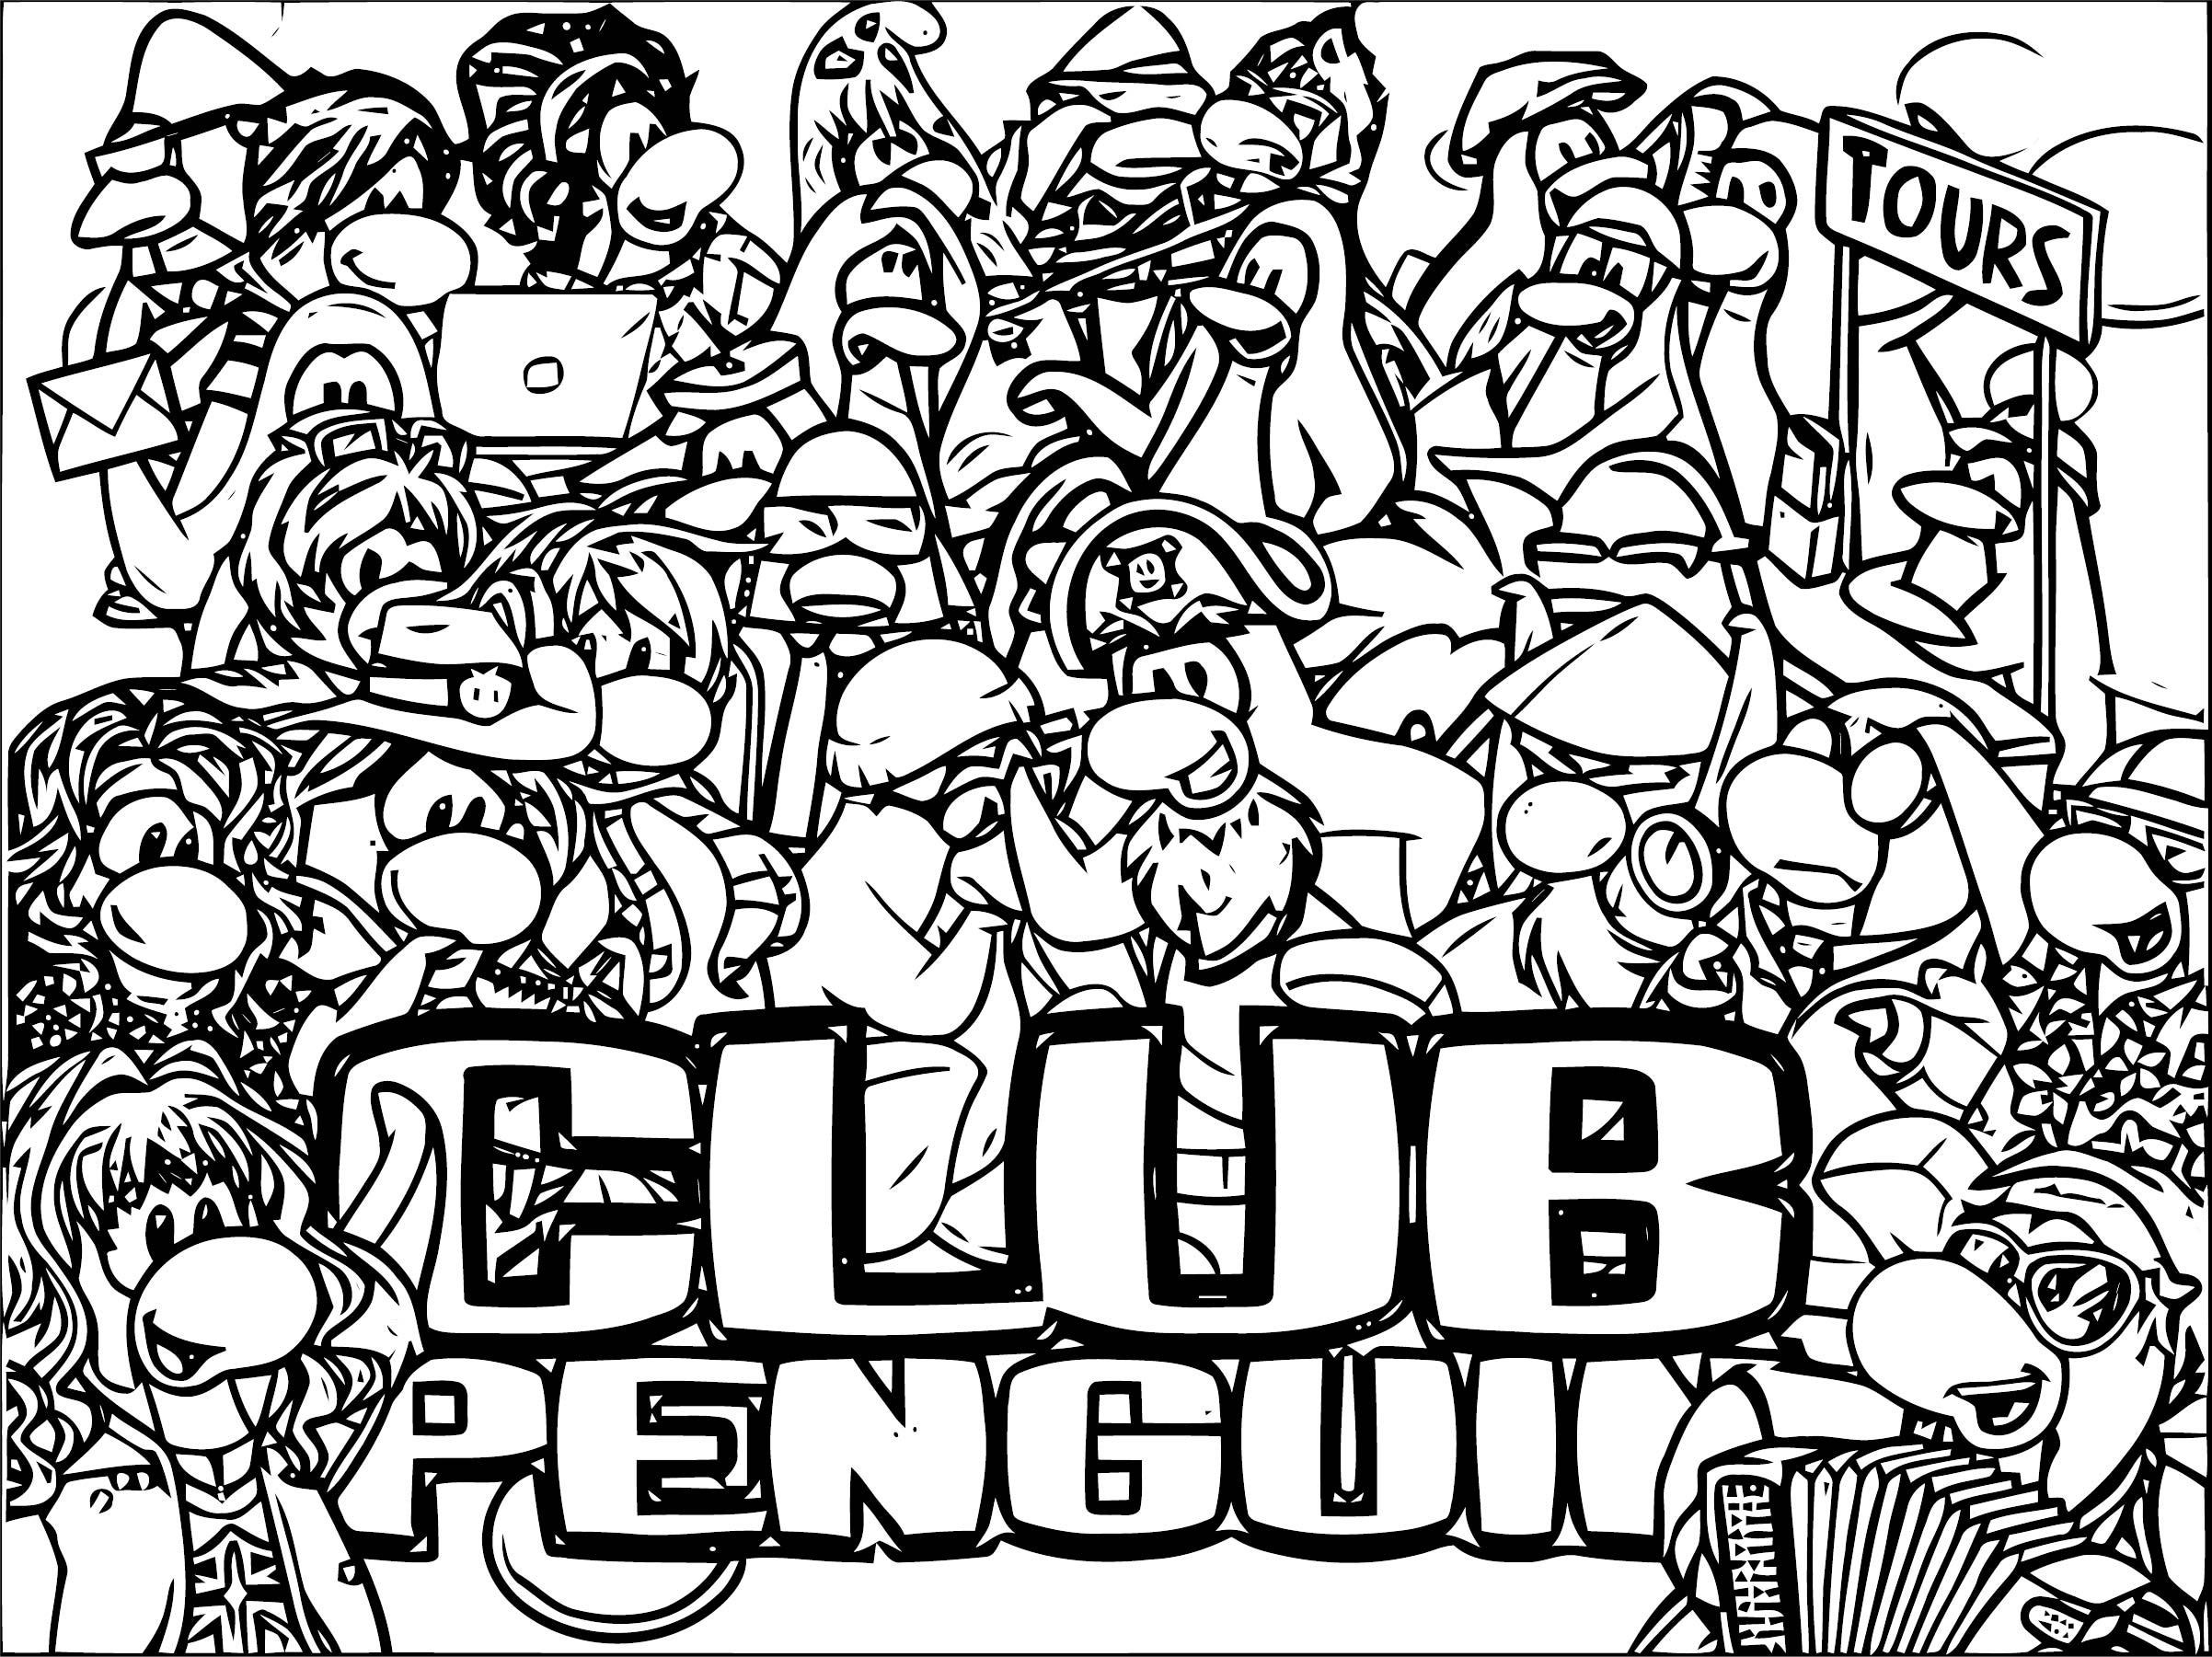 Club Penguin Logo - Club Penguin Logo Crowded Coloring Page